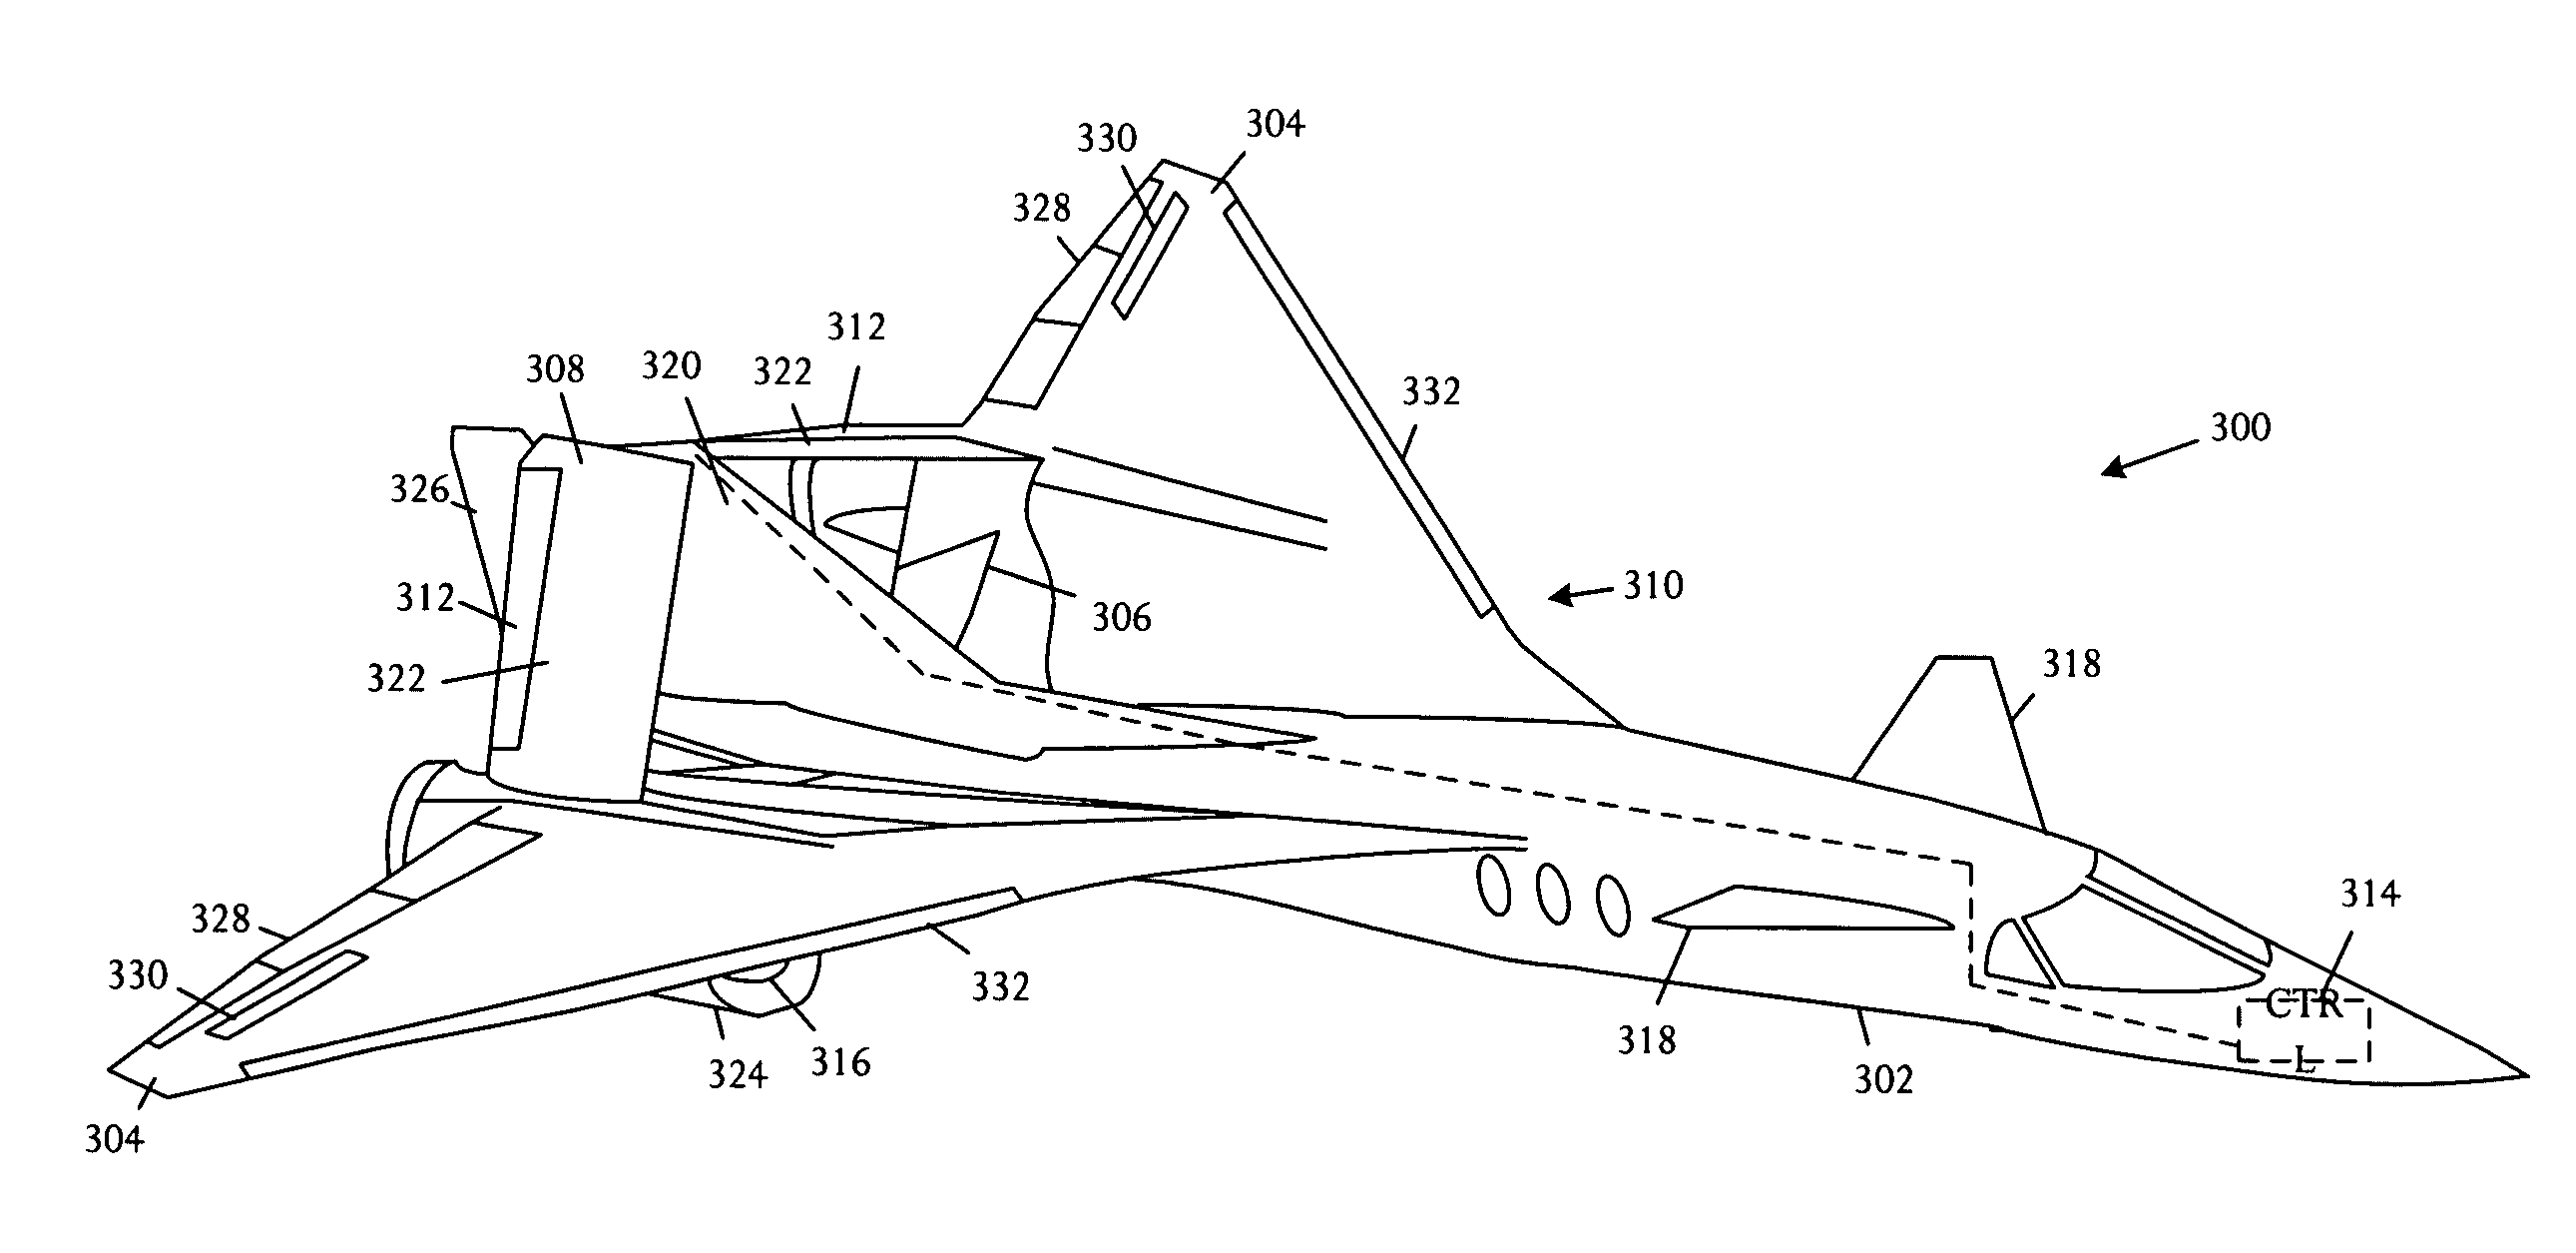 Supersonic aircraft with channel relief control